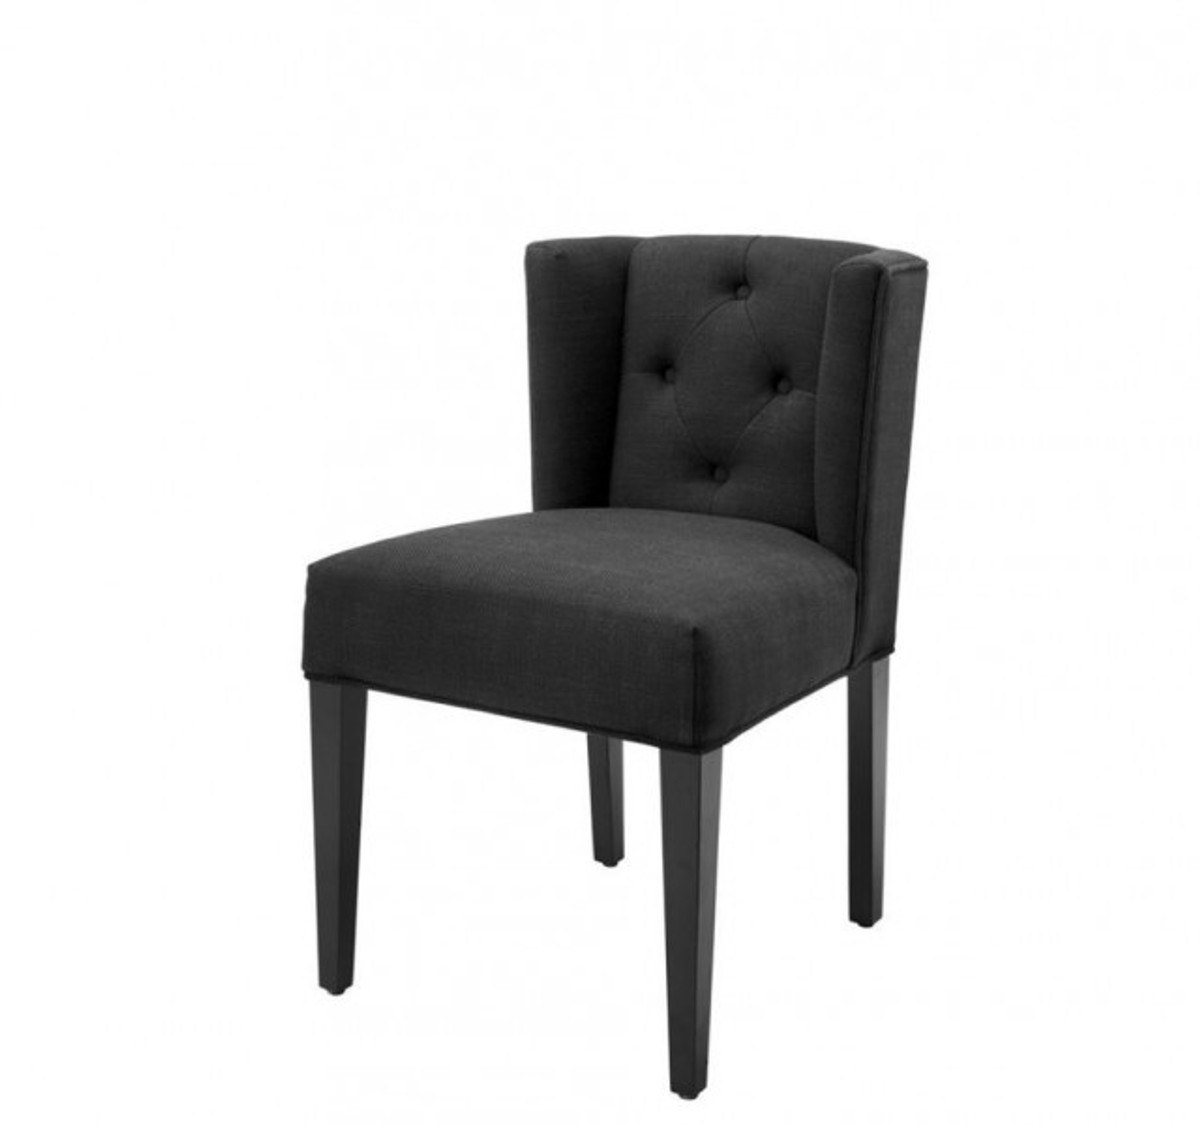 Black Wood Dining Room Chairs : Upholstered Black Leather Chairs And